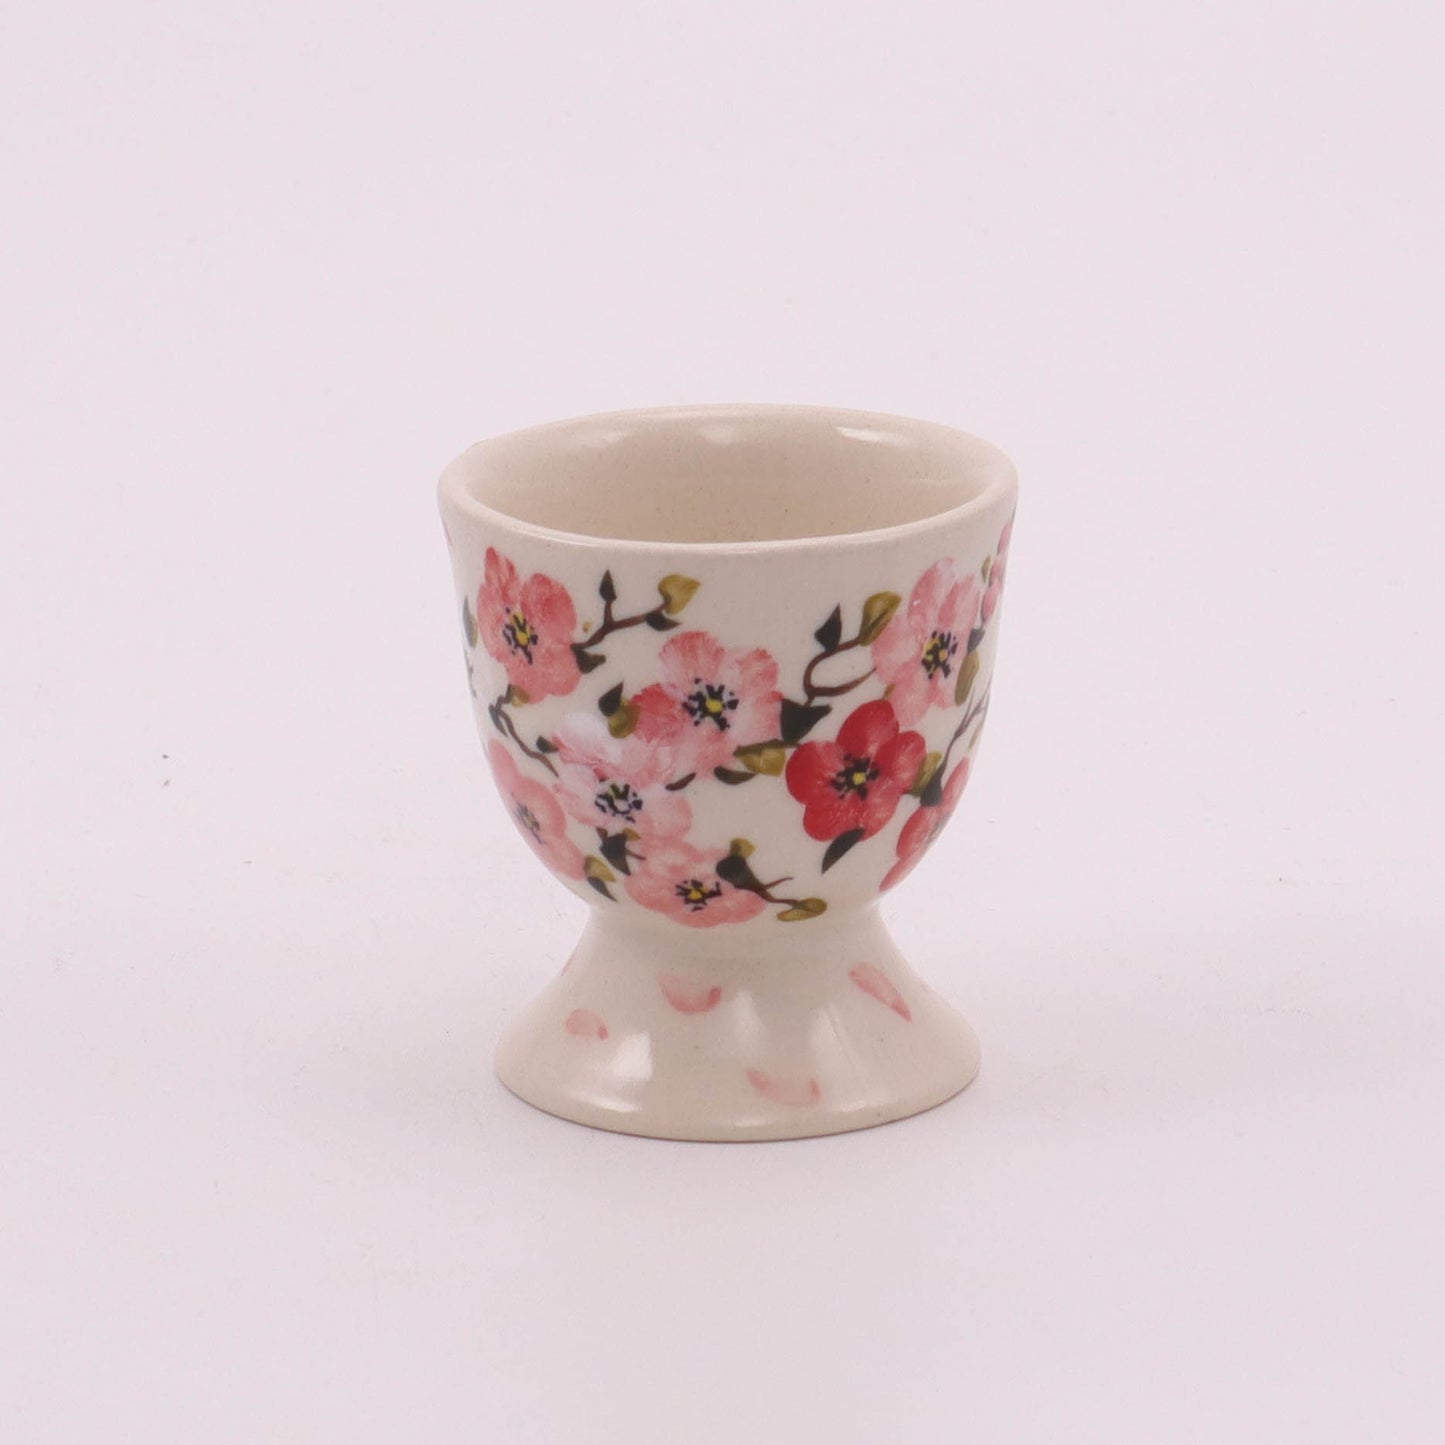 2"x3" Egg Cup. Pattern: A25